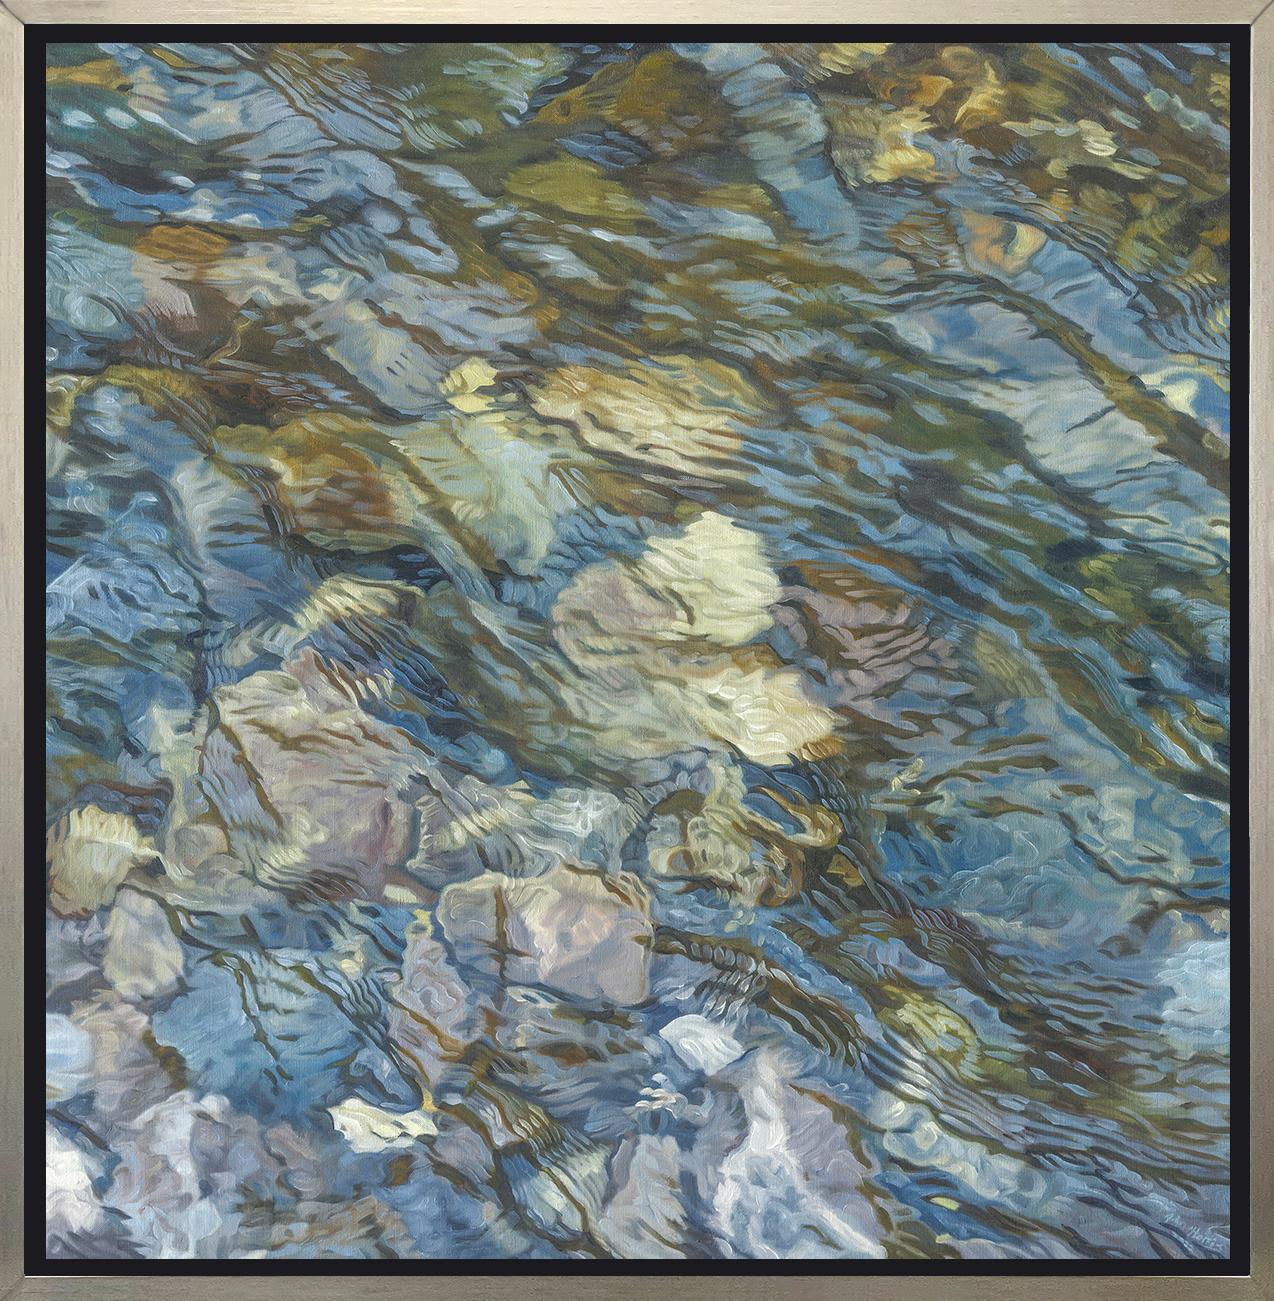 "Riverbed 4, " Framed Limited Edition Giclee Print, 53" x 53"